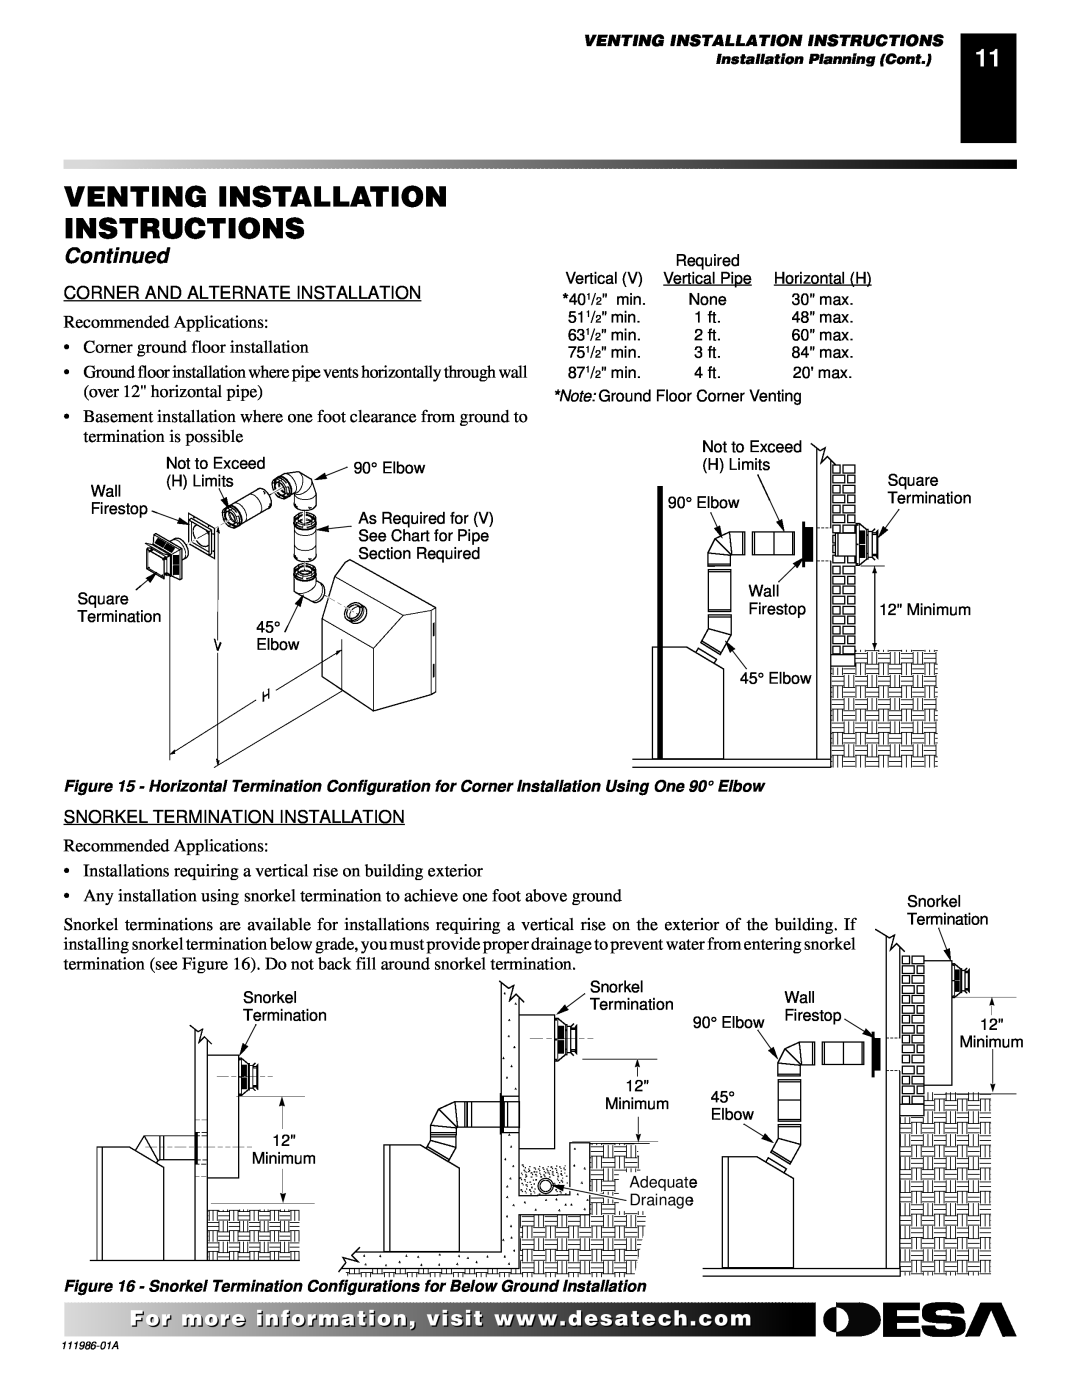 Desa T32N, T32P Venting Installation Instructions, Continued, Recommended Applications Corner ground floor installation 